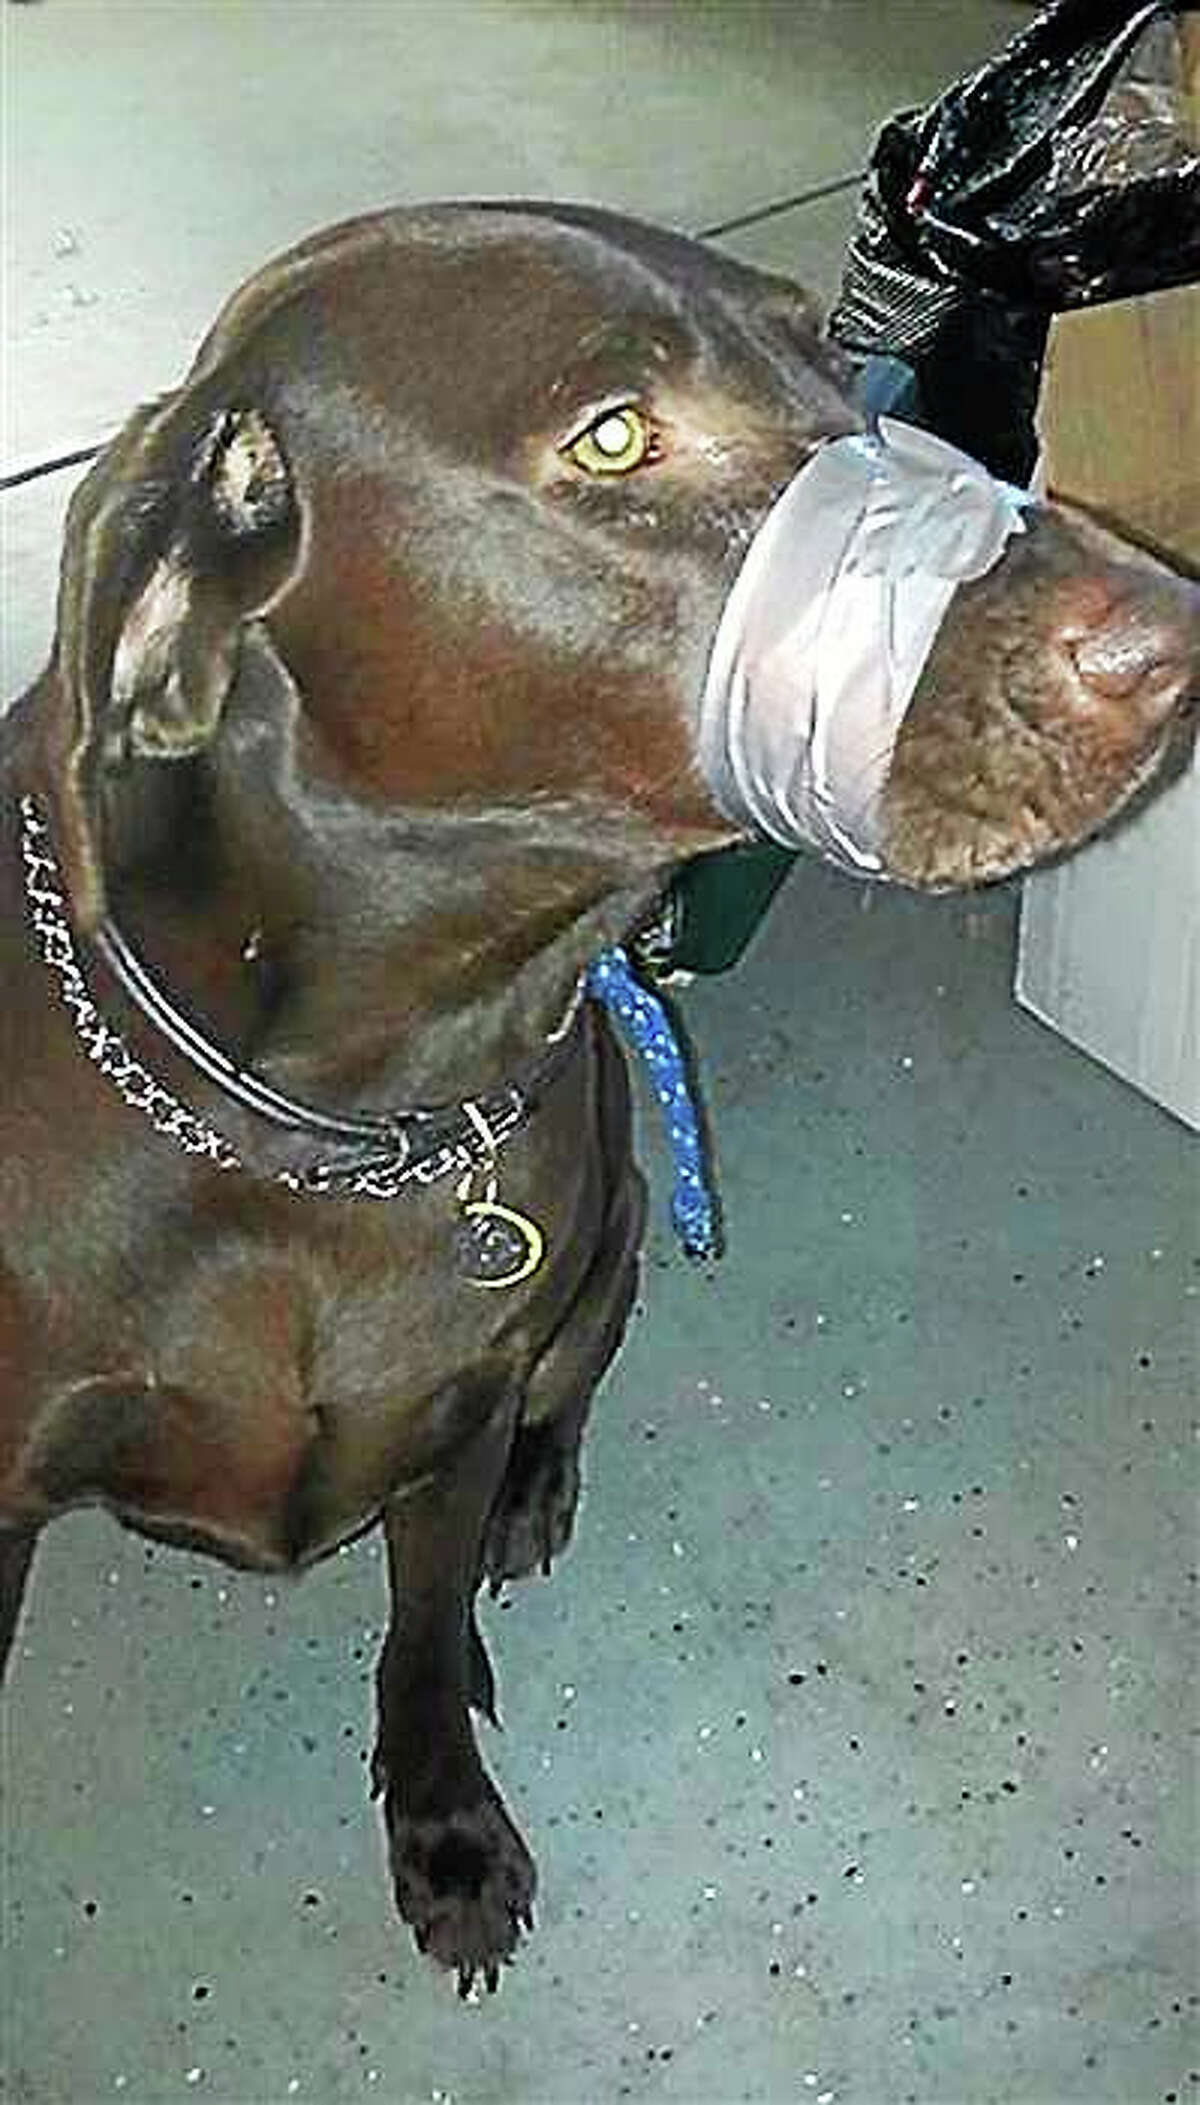 An Avon woman is under investigation as a Facebook photo of her dog’s snout wrapped in duct tape goes viral.